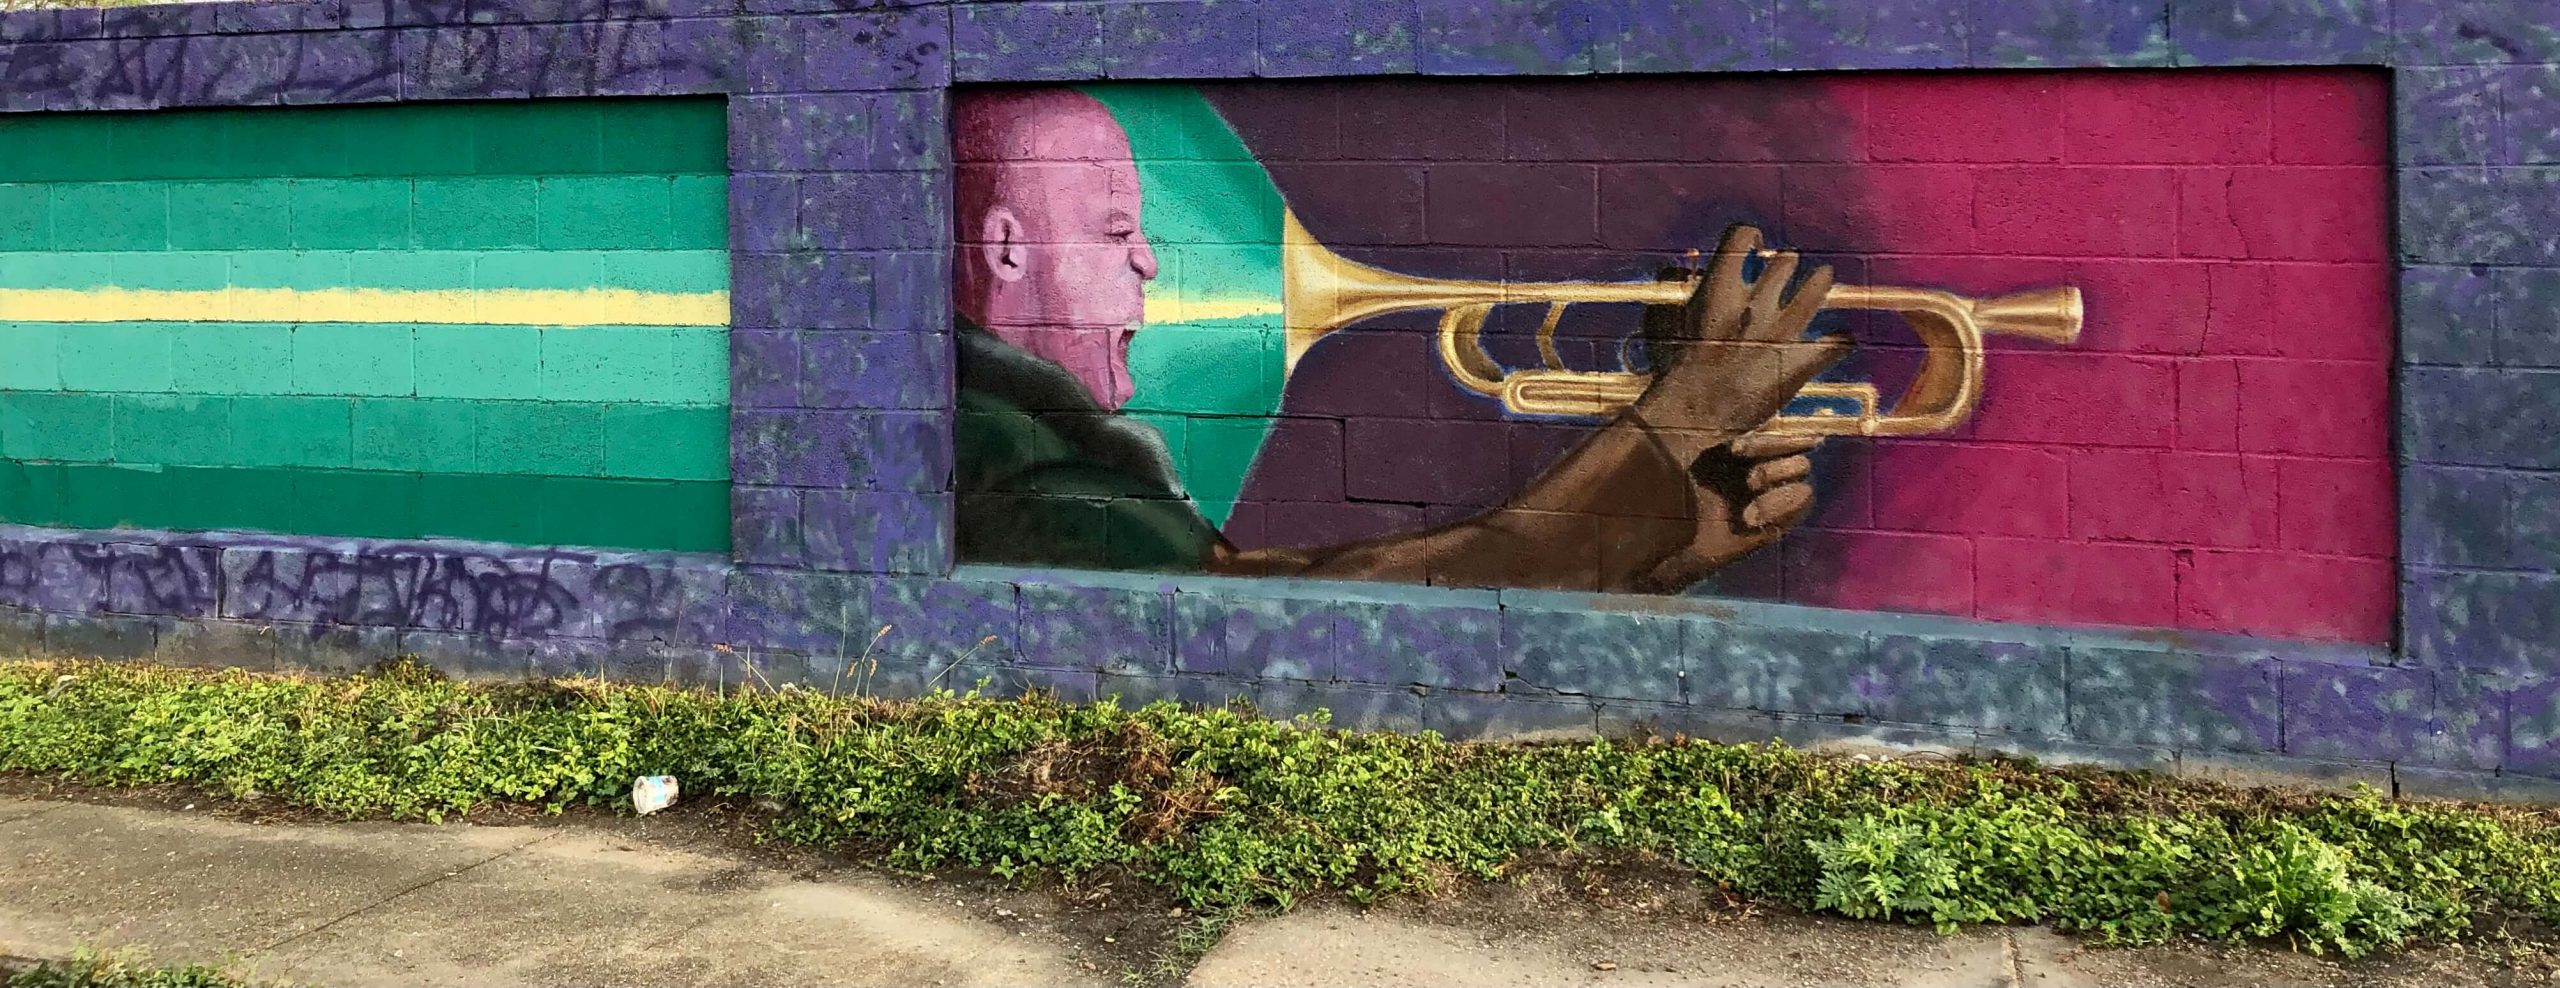 mural of trumpet player